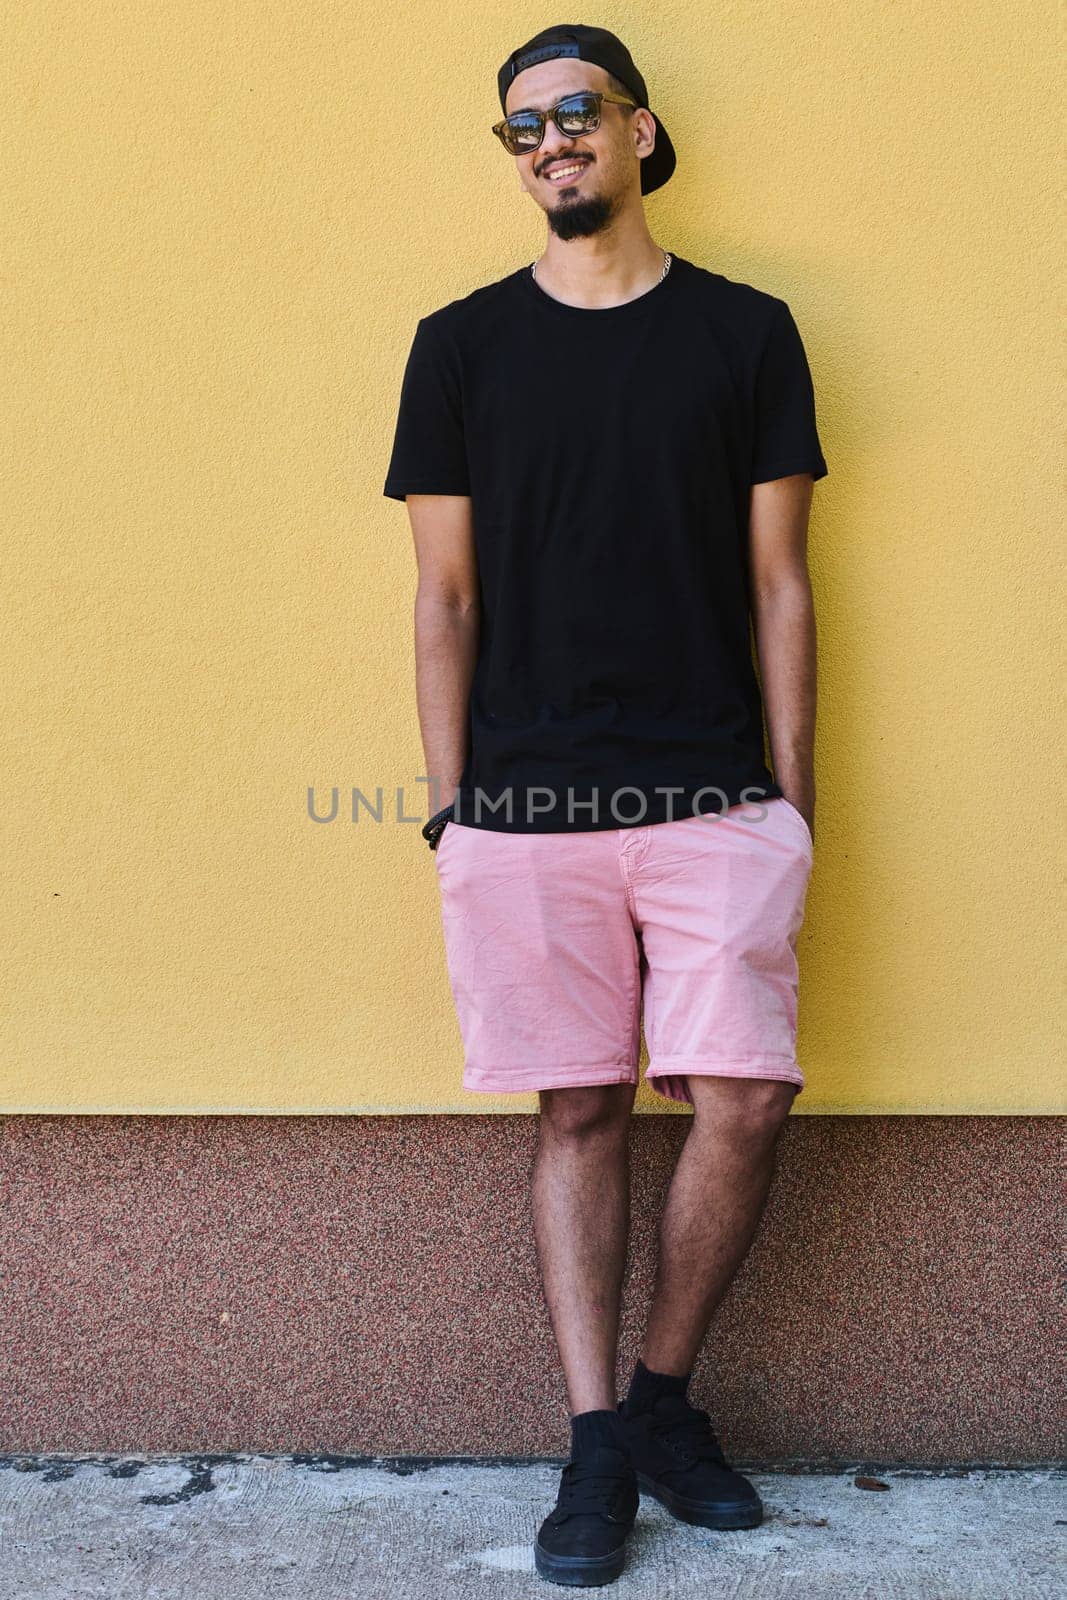 A depiction of urban coolness: a Middle Eastern teenager leaning against a yellow wall, exuding confidence in casual attire.